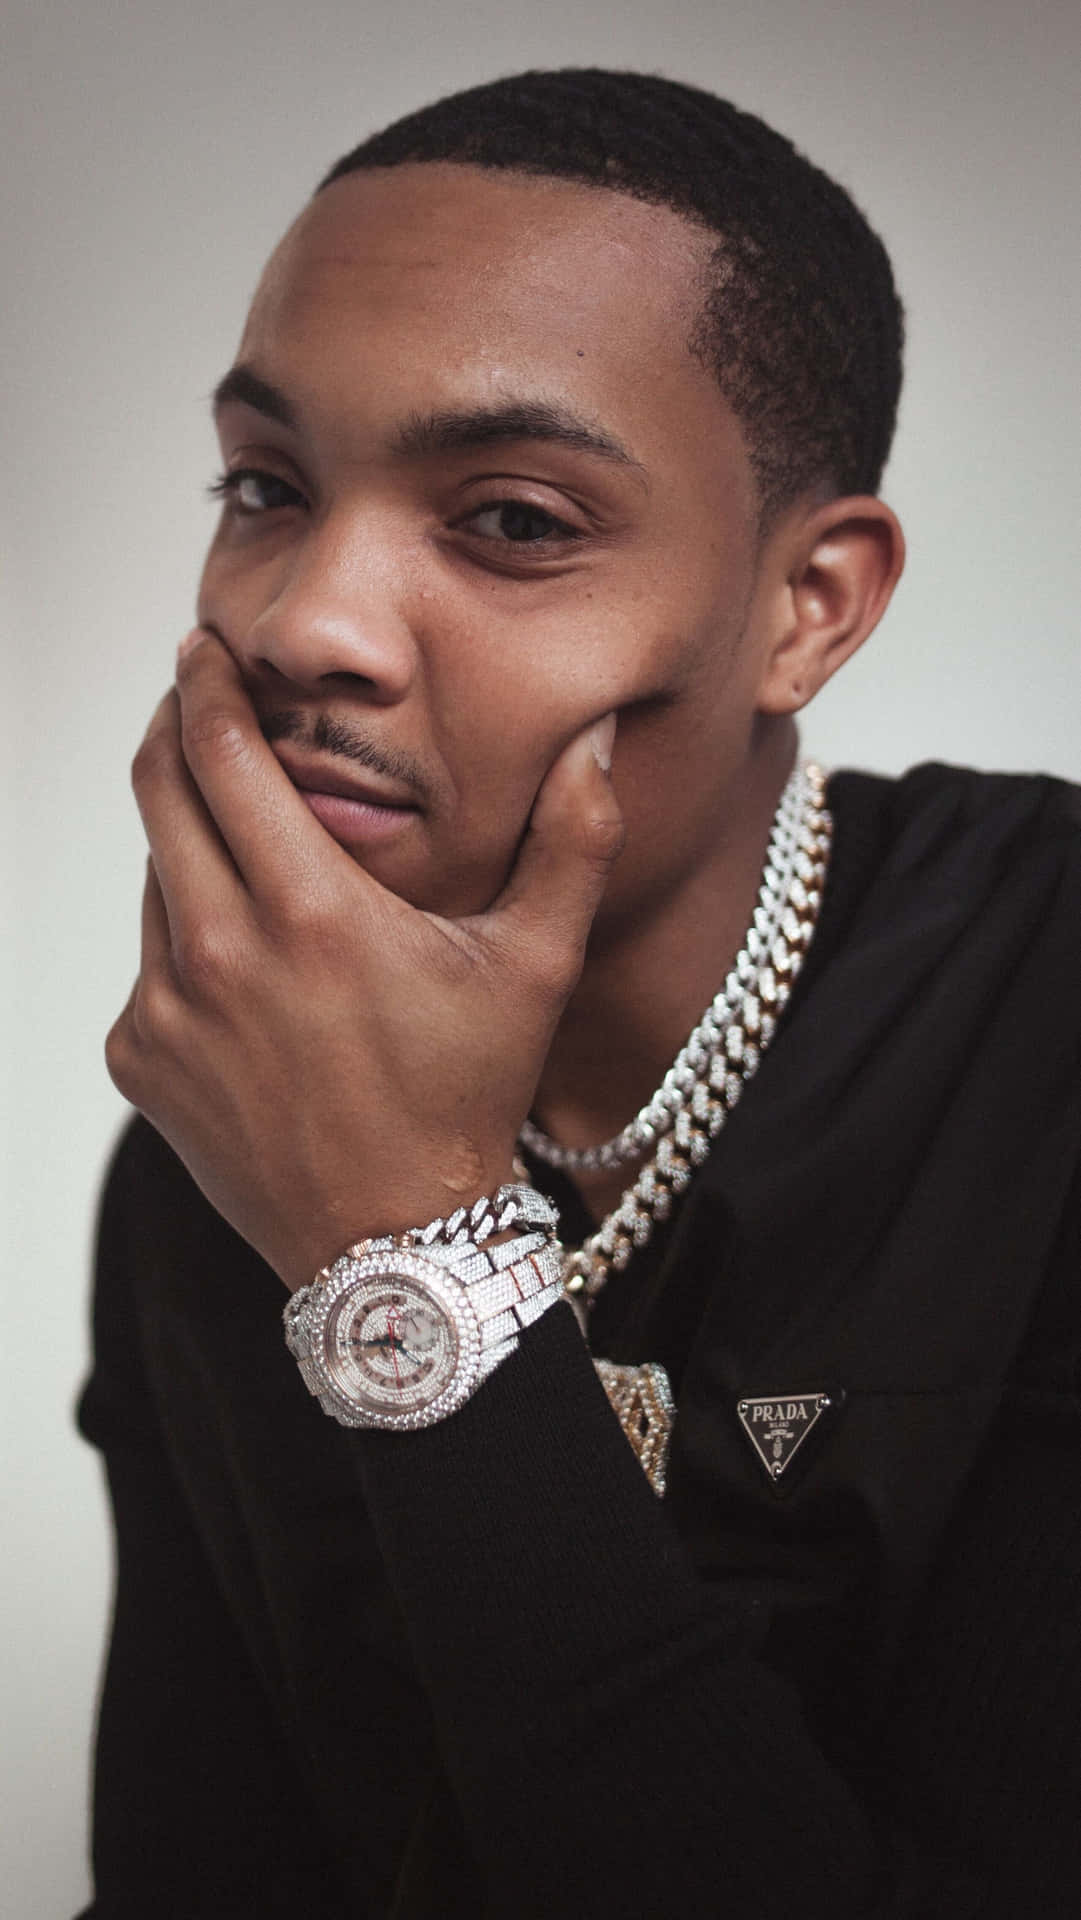 Check out the sleek, modern design of the Herbo Iphone Wallpaper